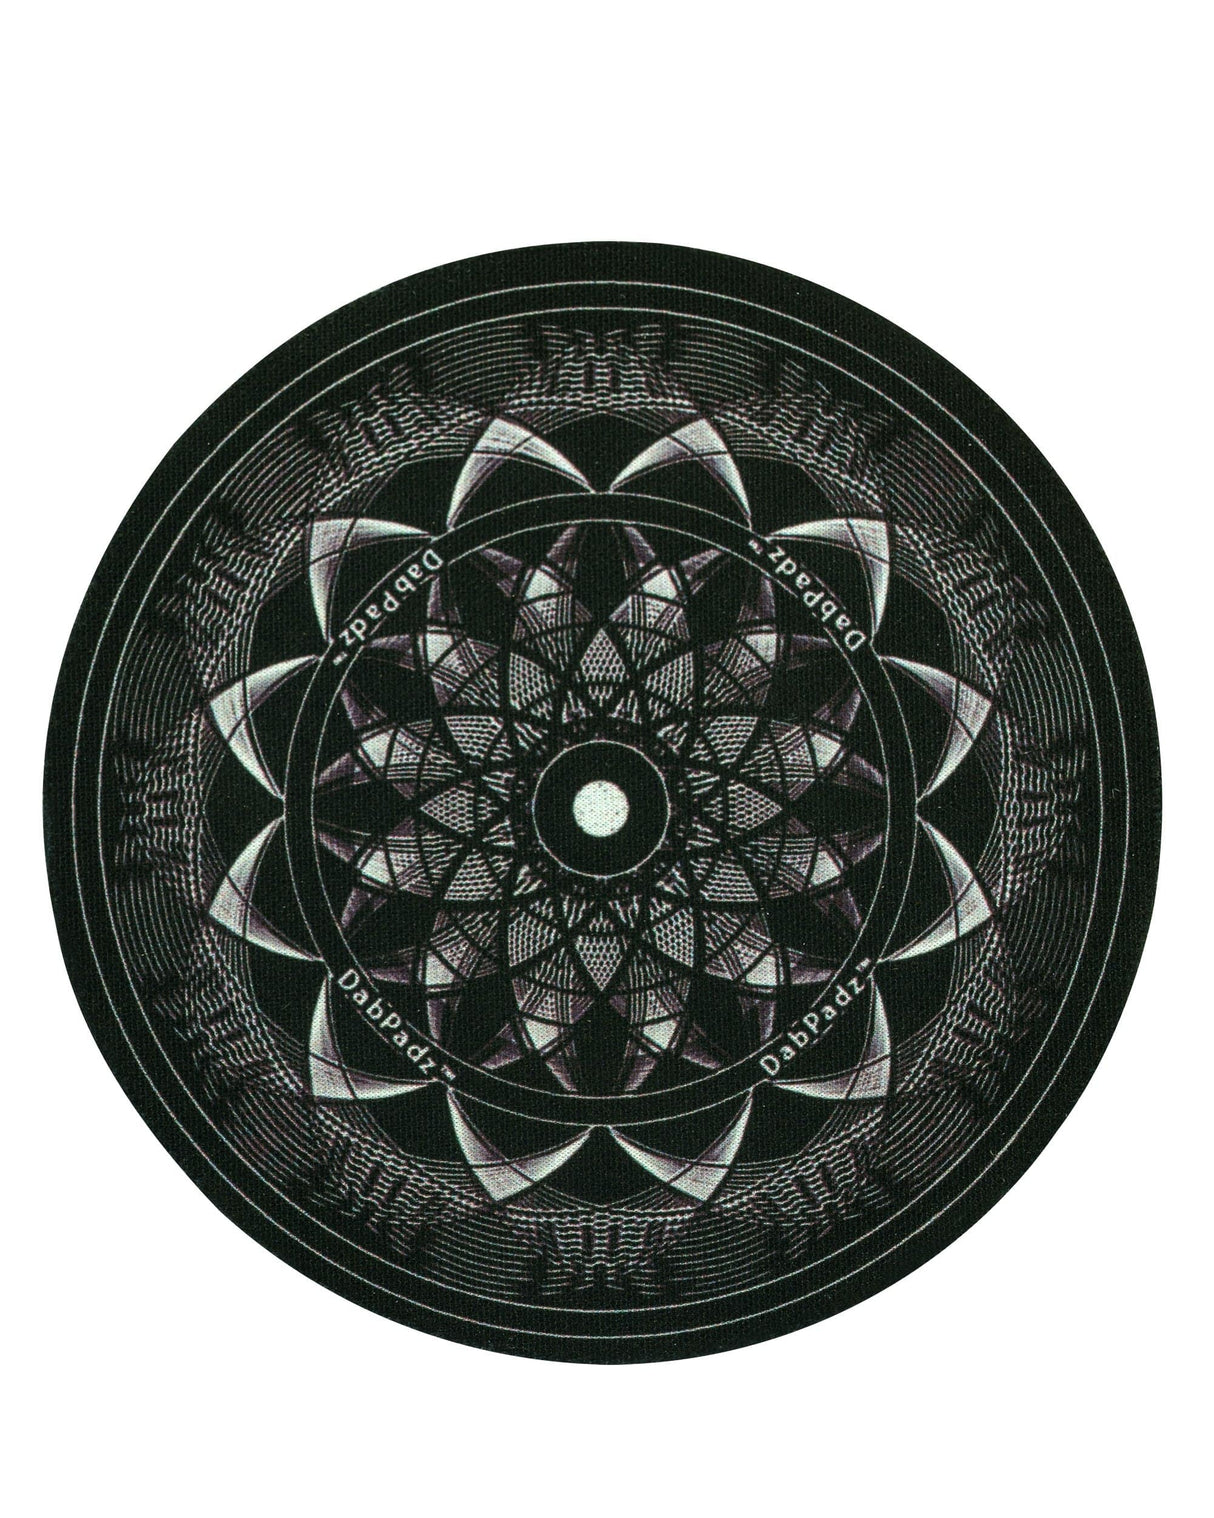 DabPadz 5" Rubber Dropmat with geometric design, top view, for protecting surfaces during dabbing